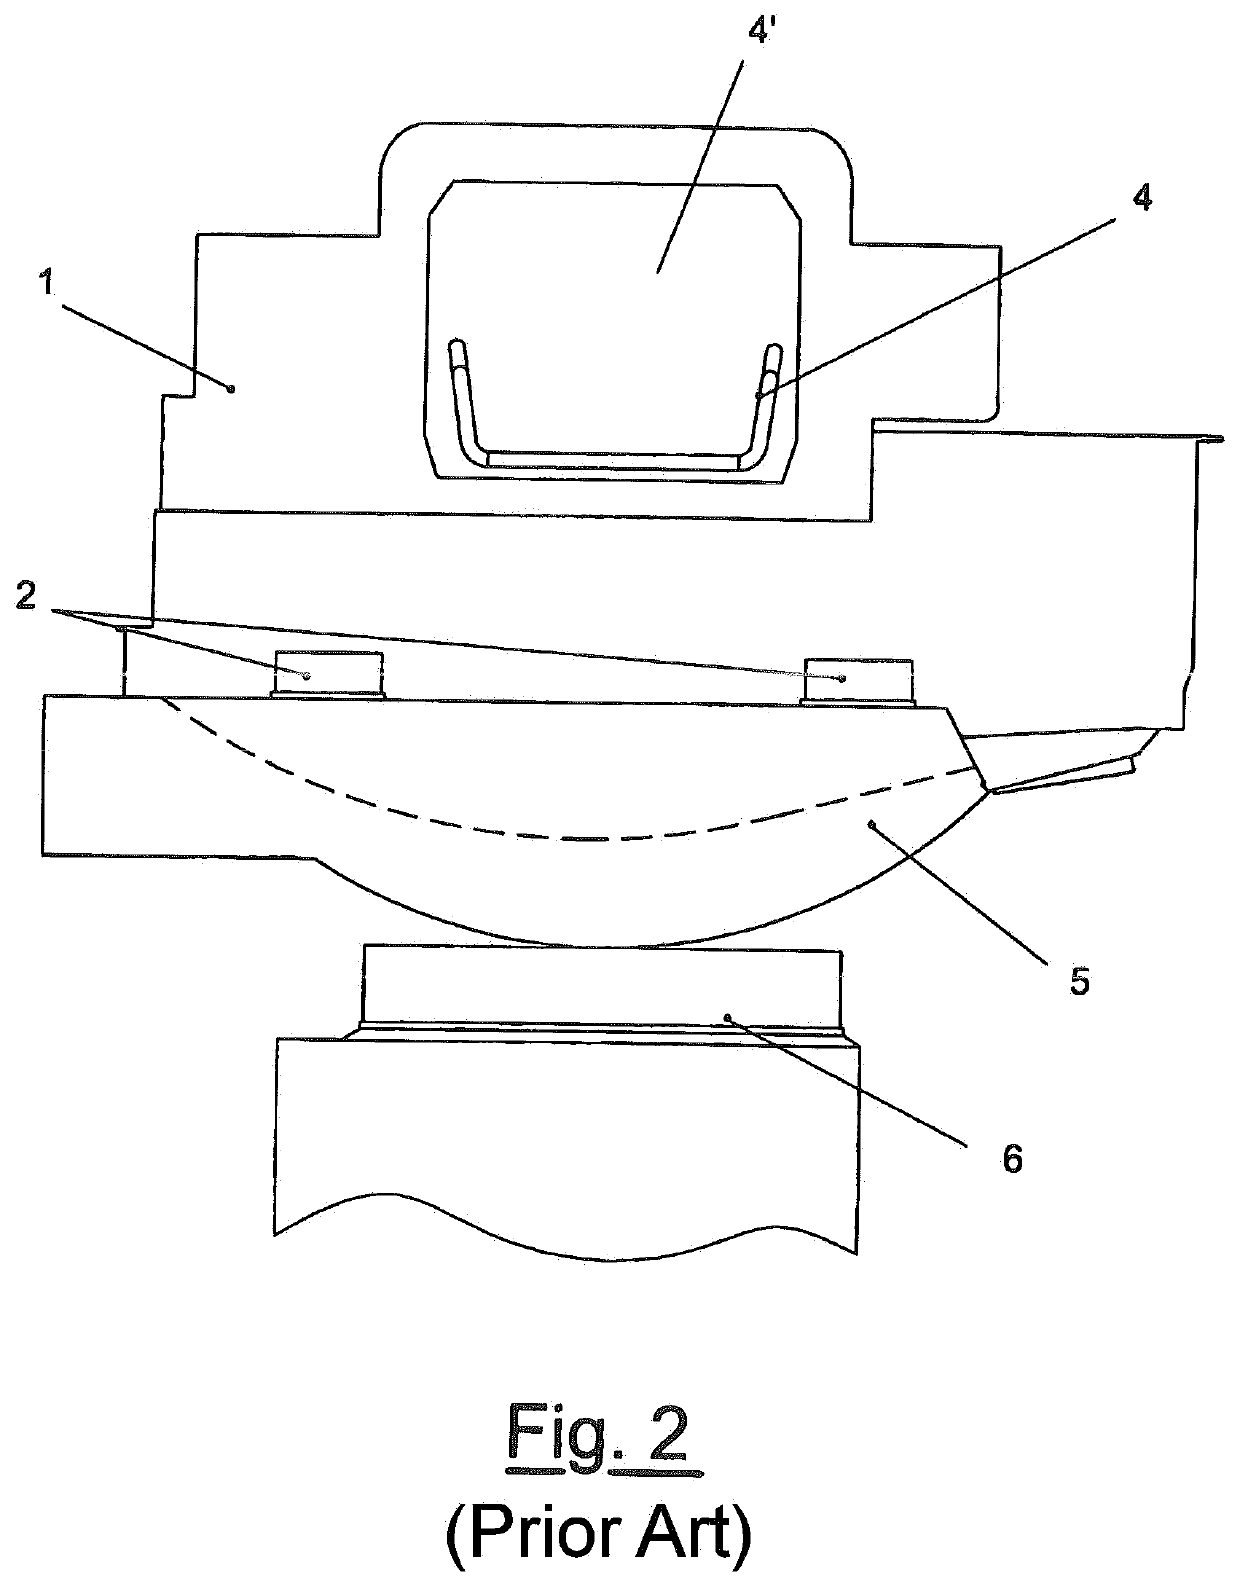 Equipment for measurement and control of load material fed into a furnace